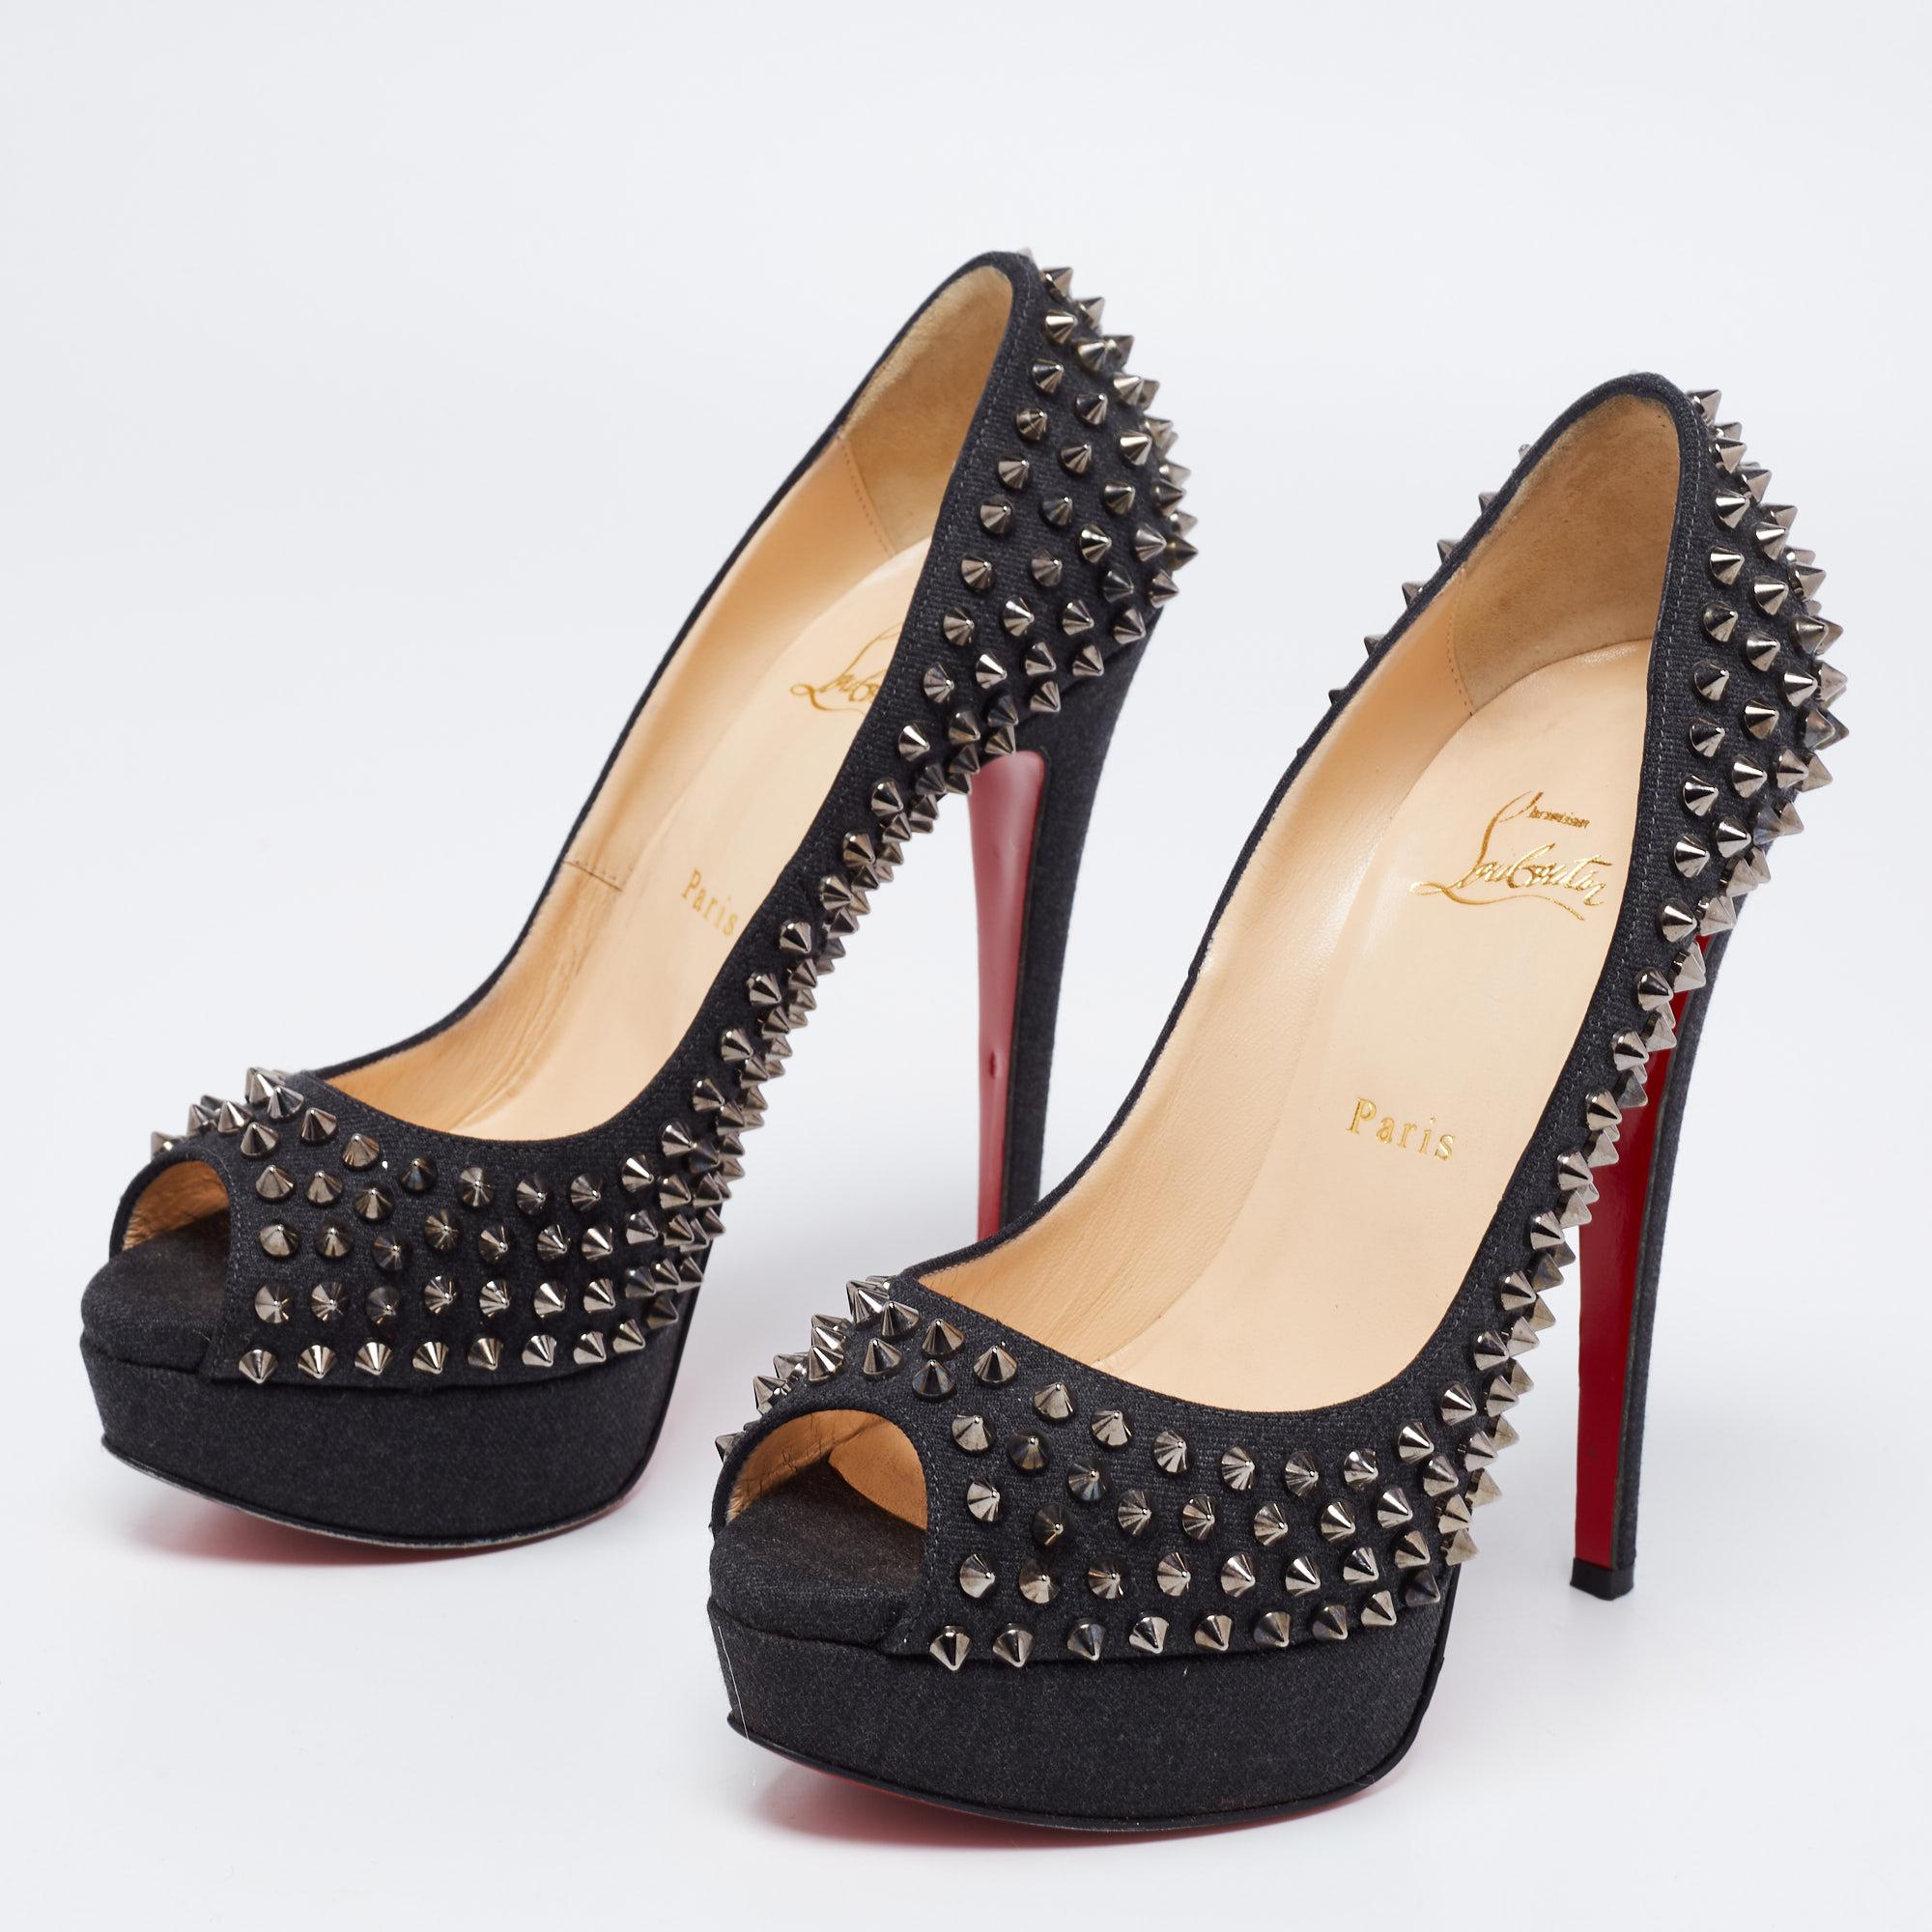 Stand out from the crowd with this classy pair of Christian Louboutin pumps that exude high fashion with class. Crafted from denim, this is a creation from their Lady Peep collection, and the addition of spikes lends it a bold twist. Complete with